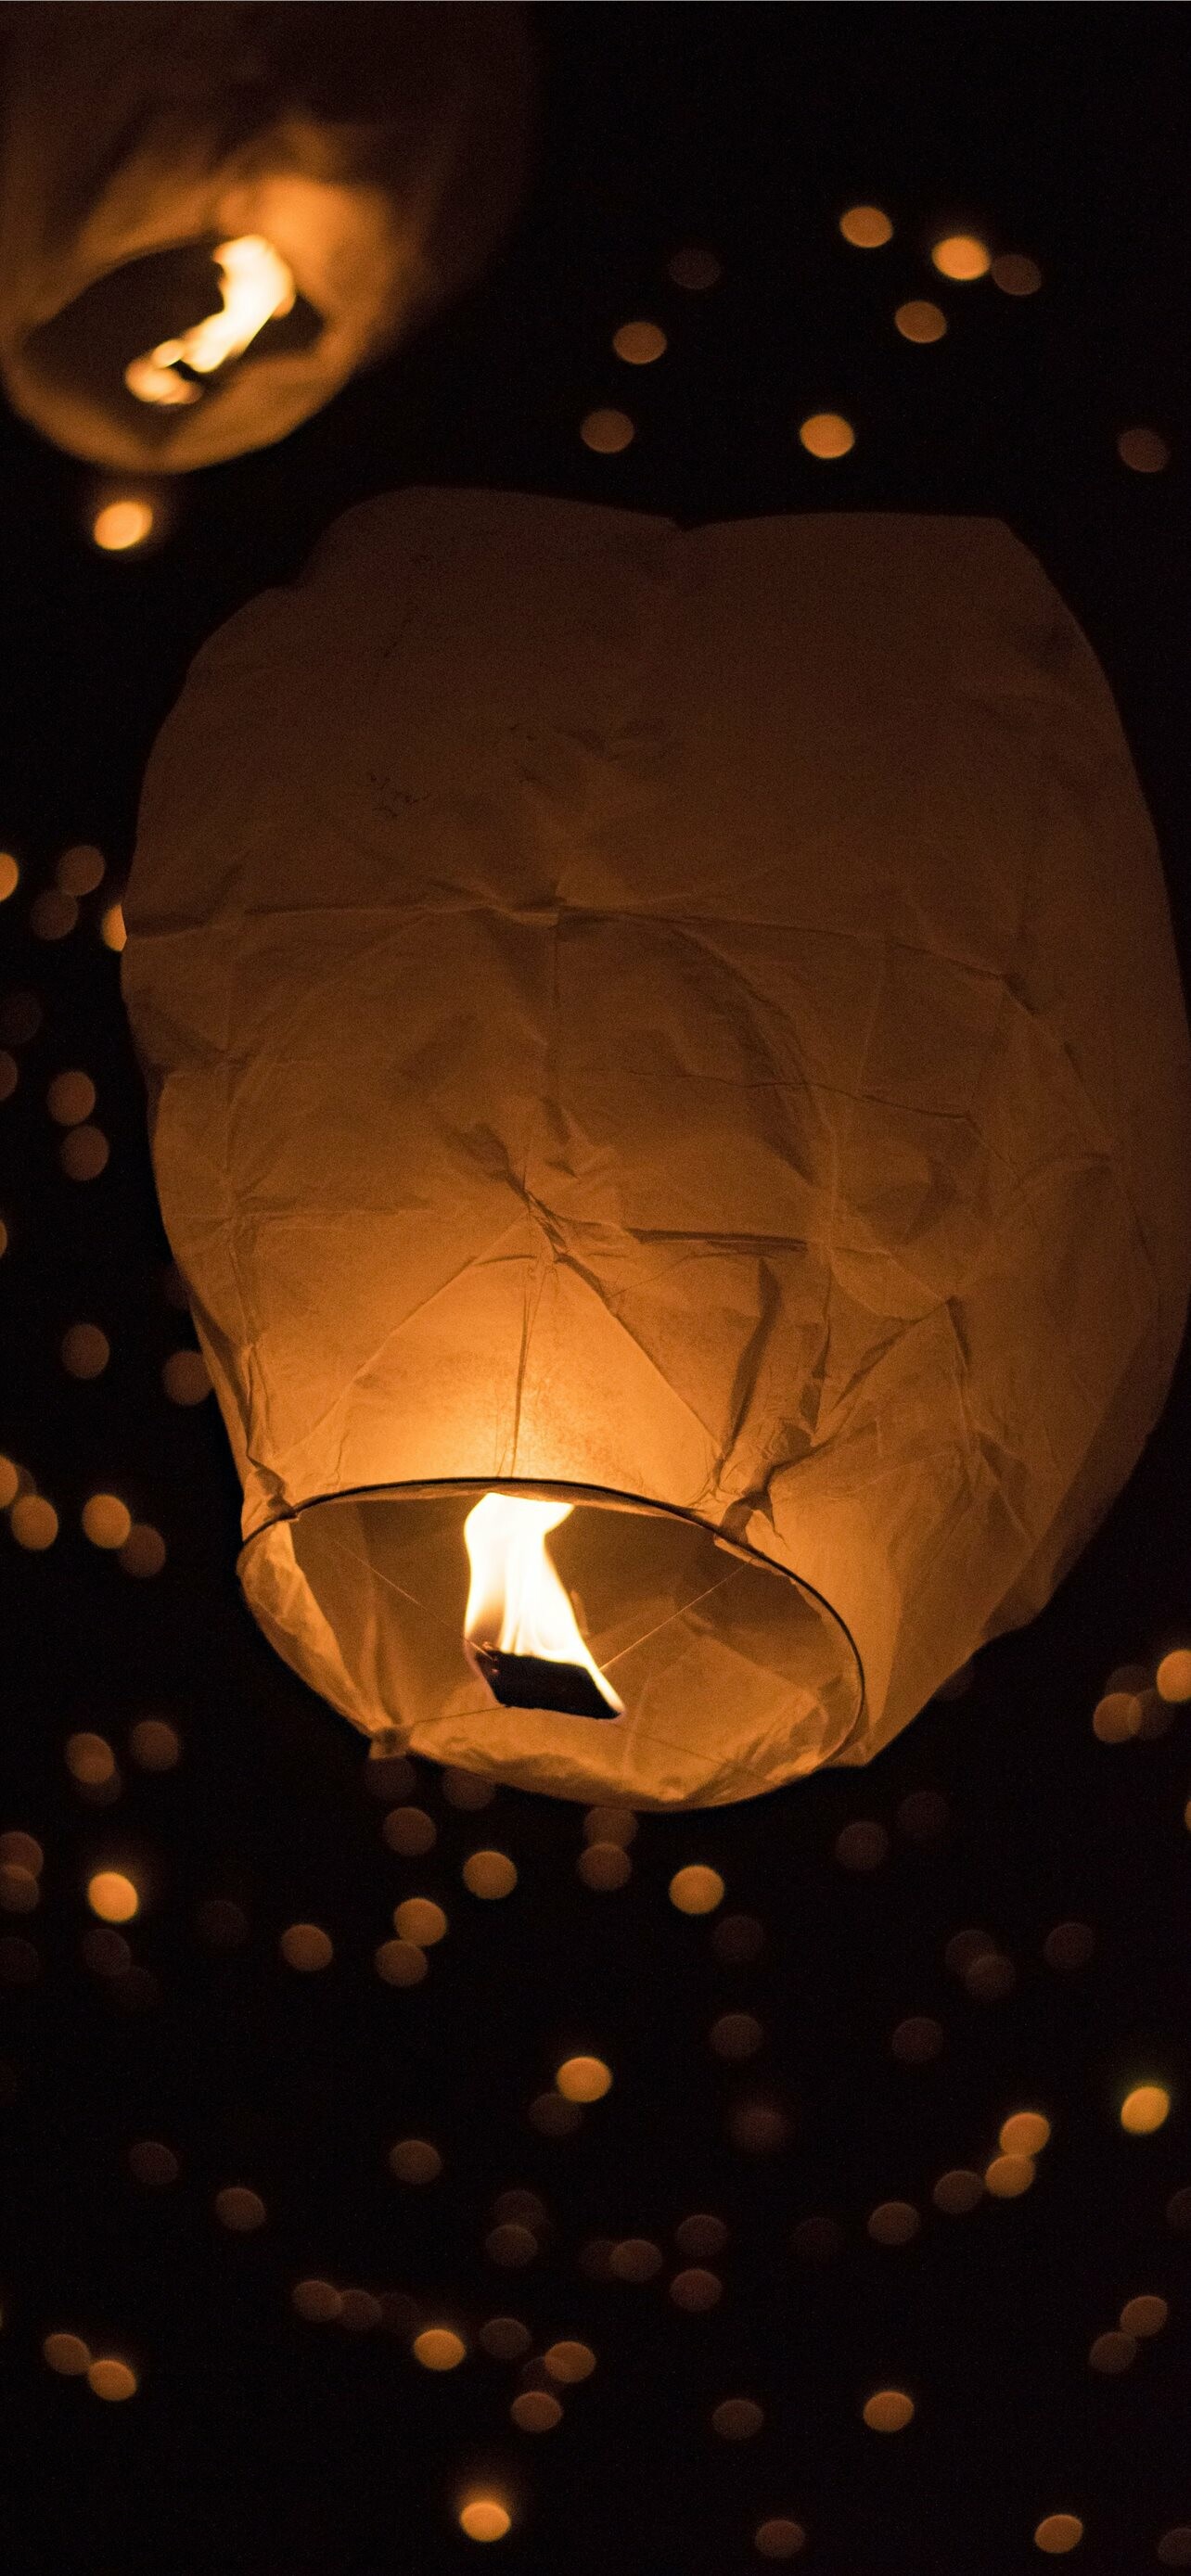 Lantern Festival: The lanterns symbolizing the people letting go of their past selves and getting new ones. 1290x2780 HD Wallpaper.